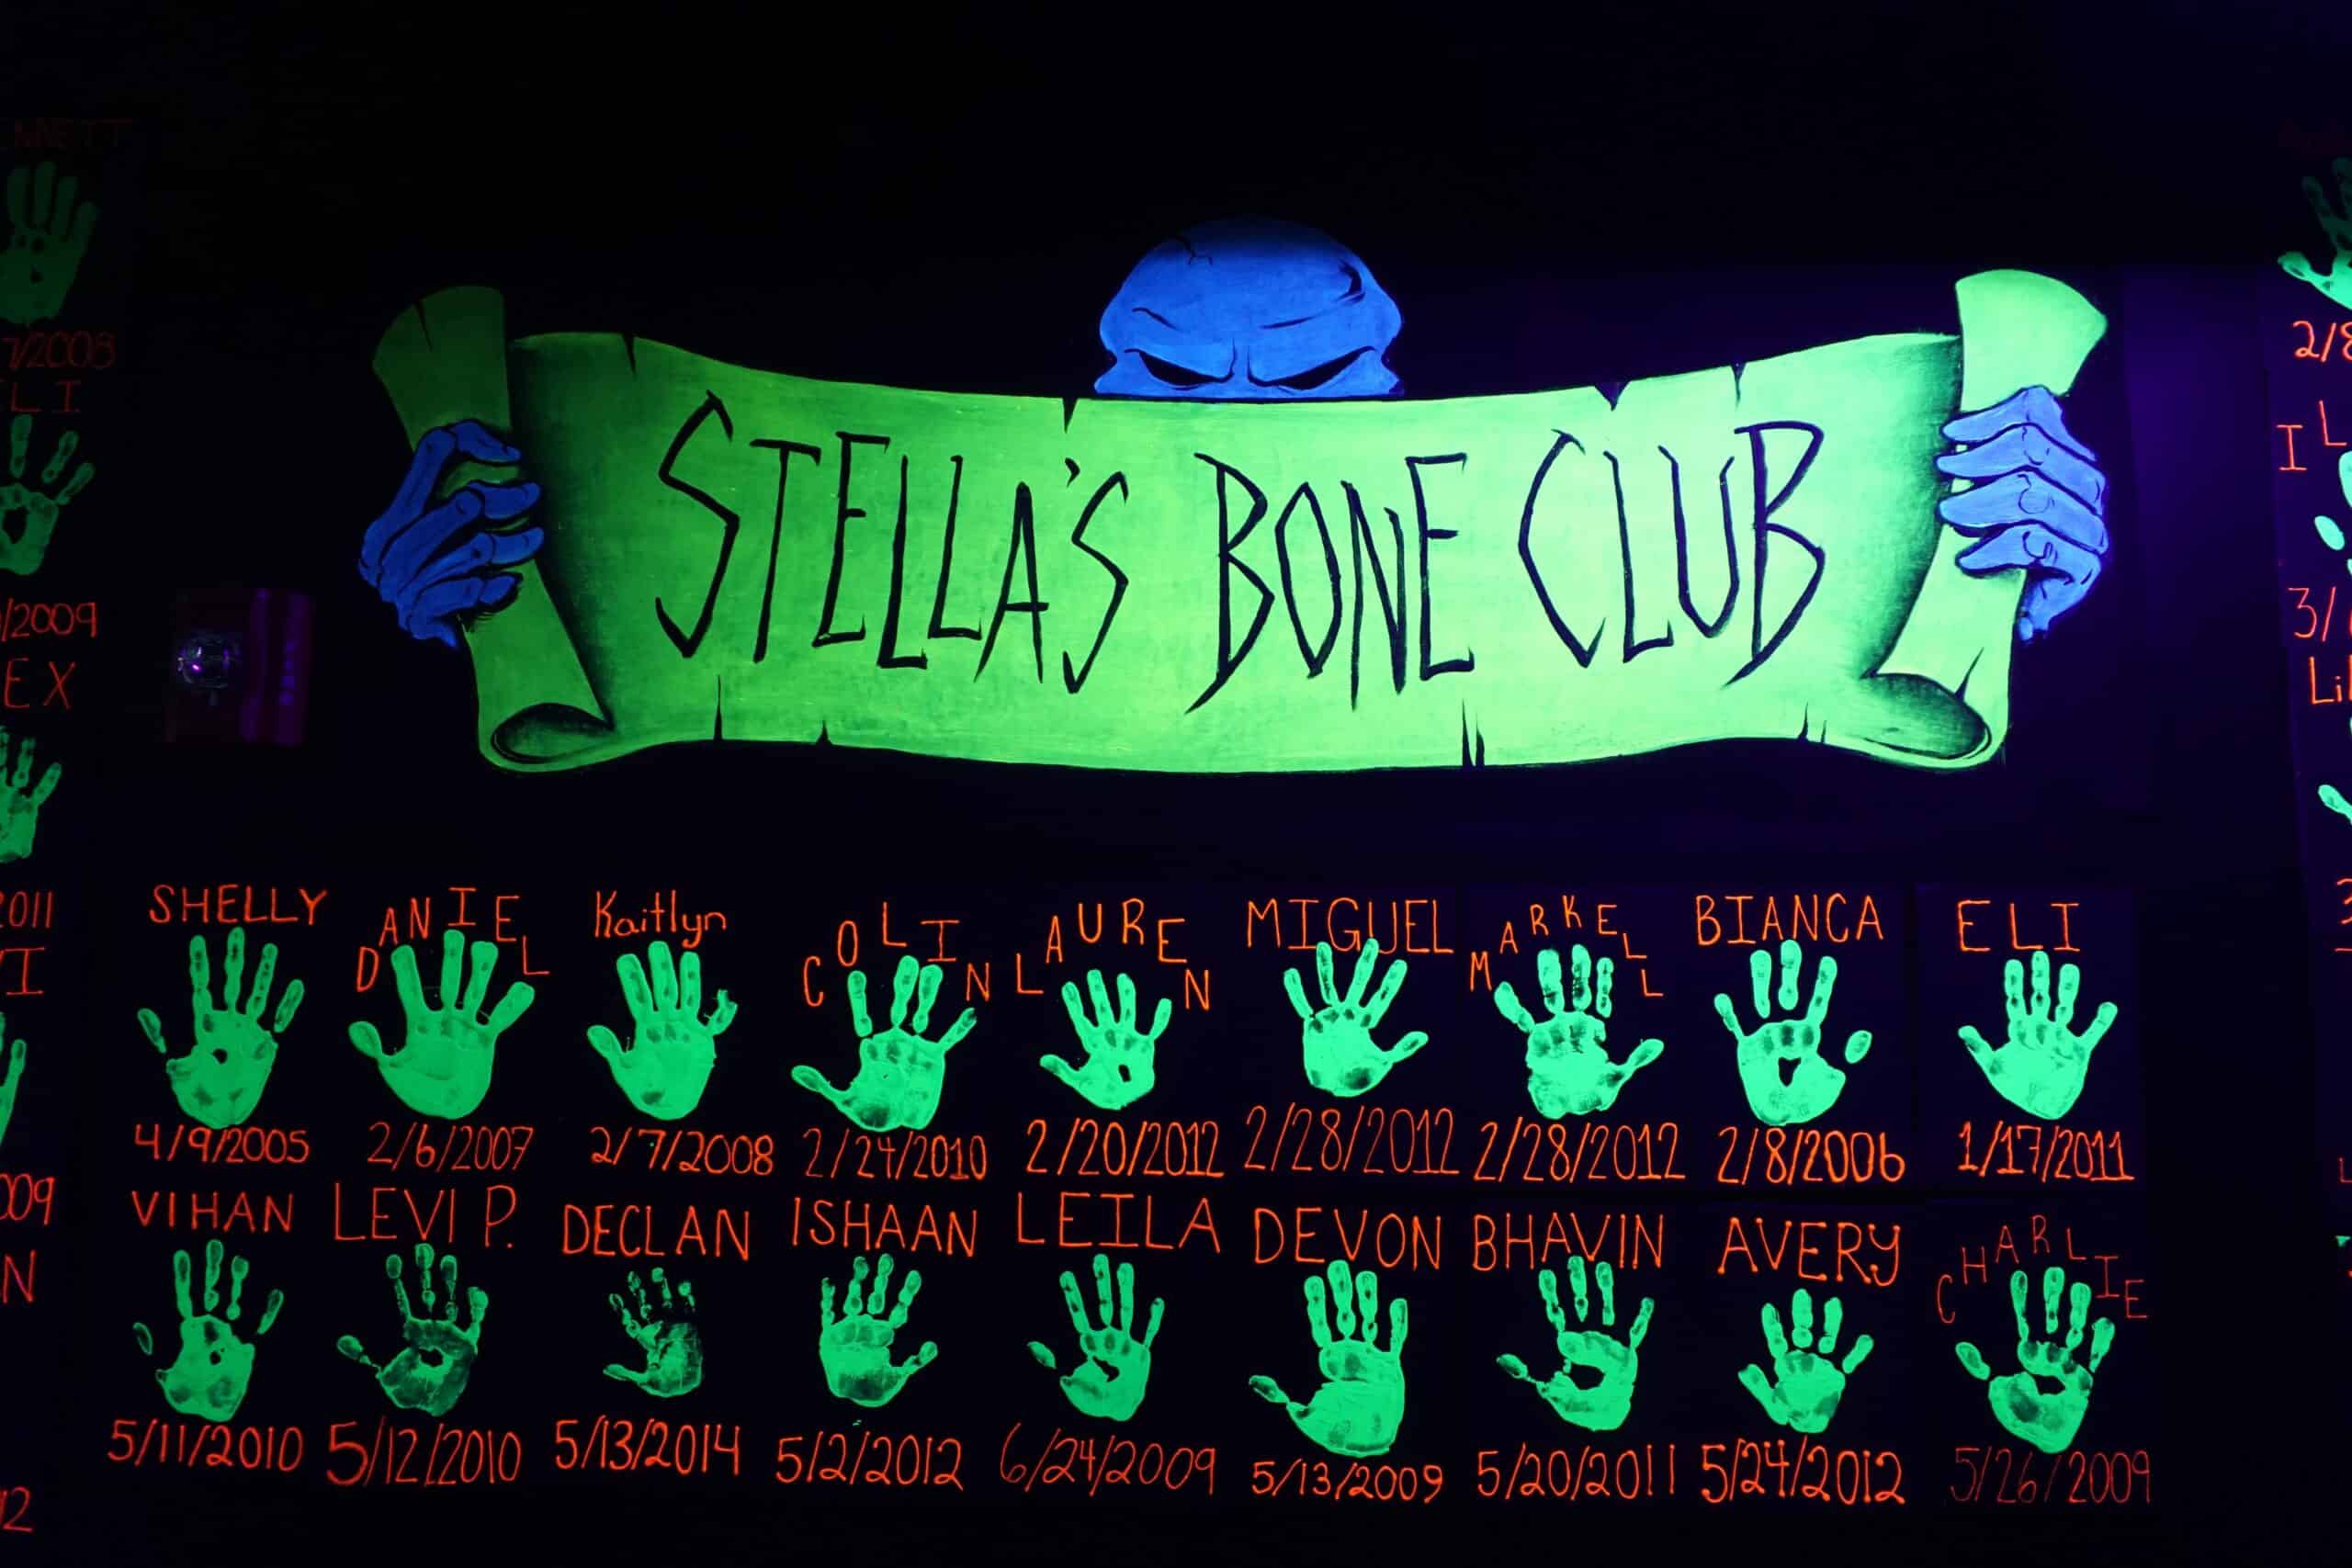 stella's bone club, a group event, with hand prints below